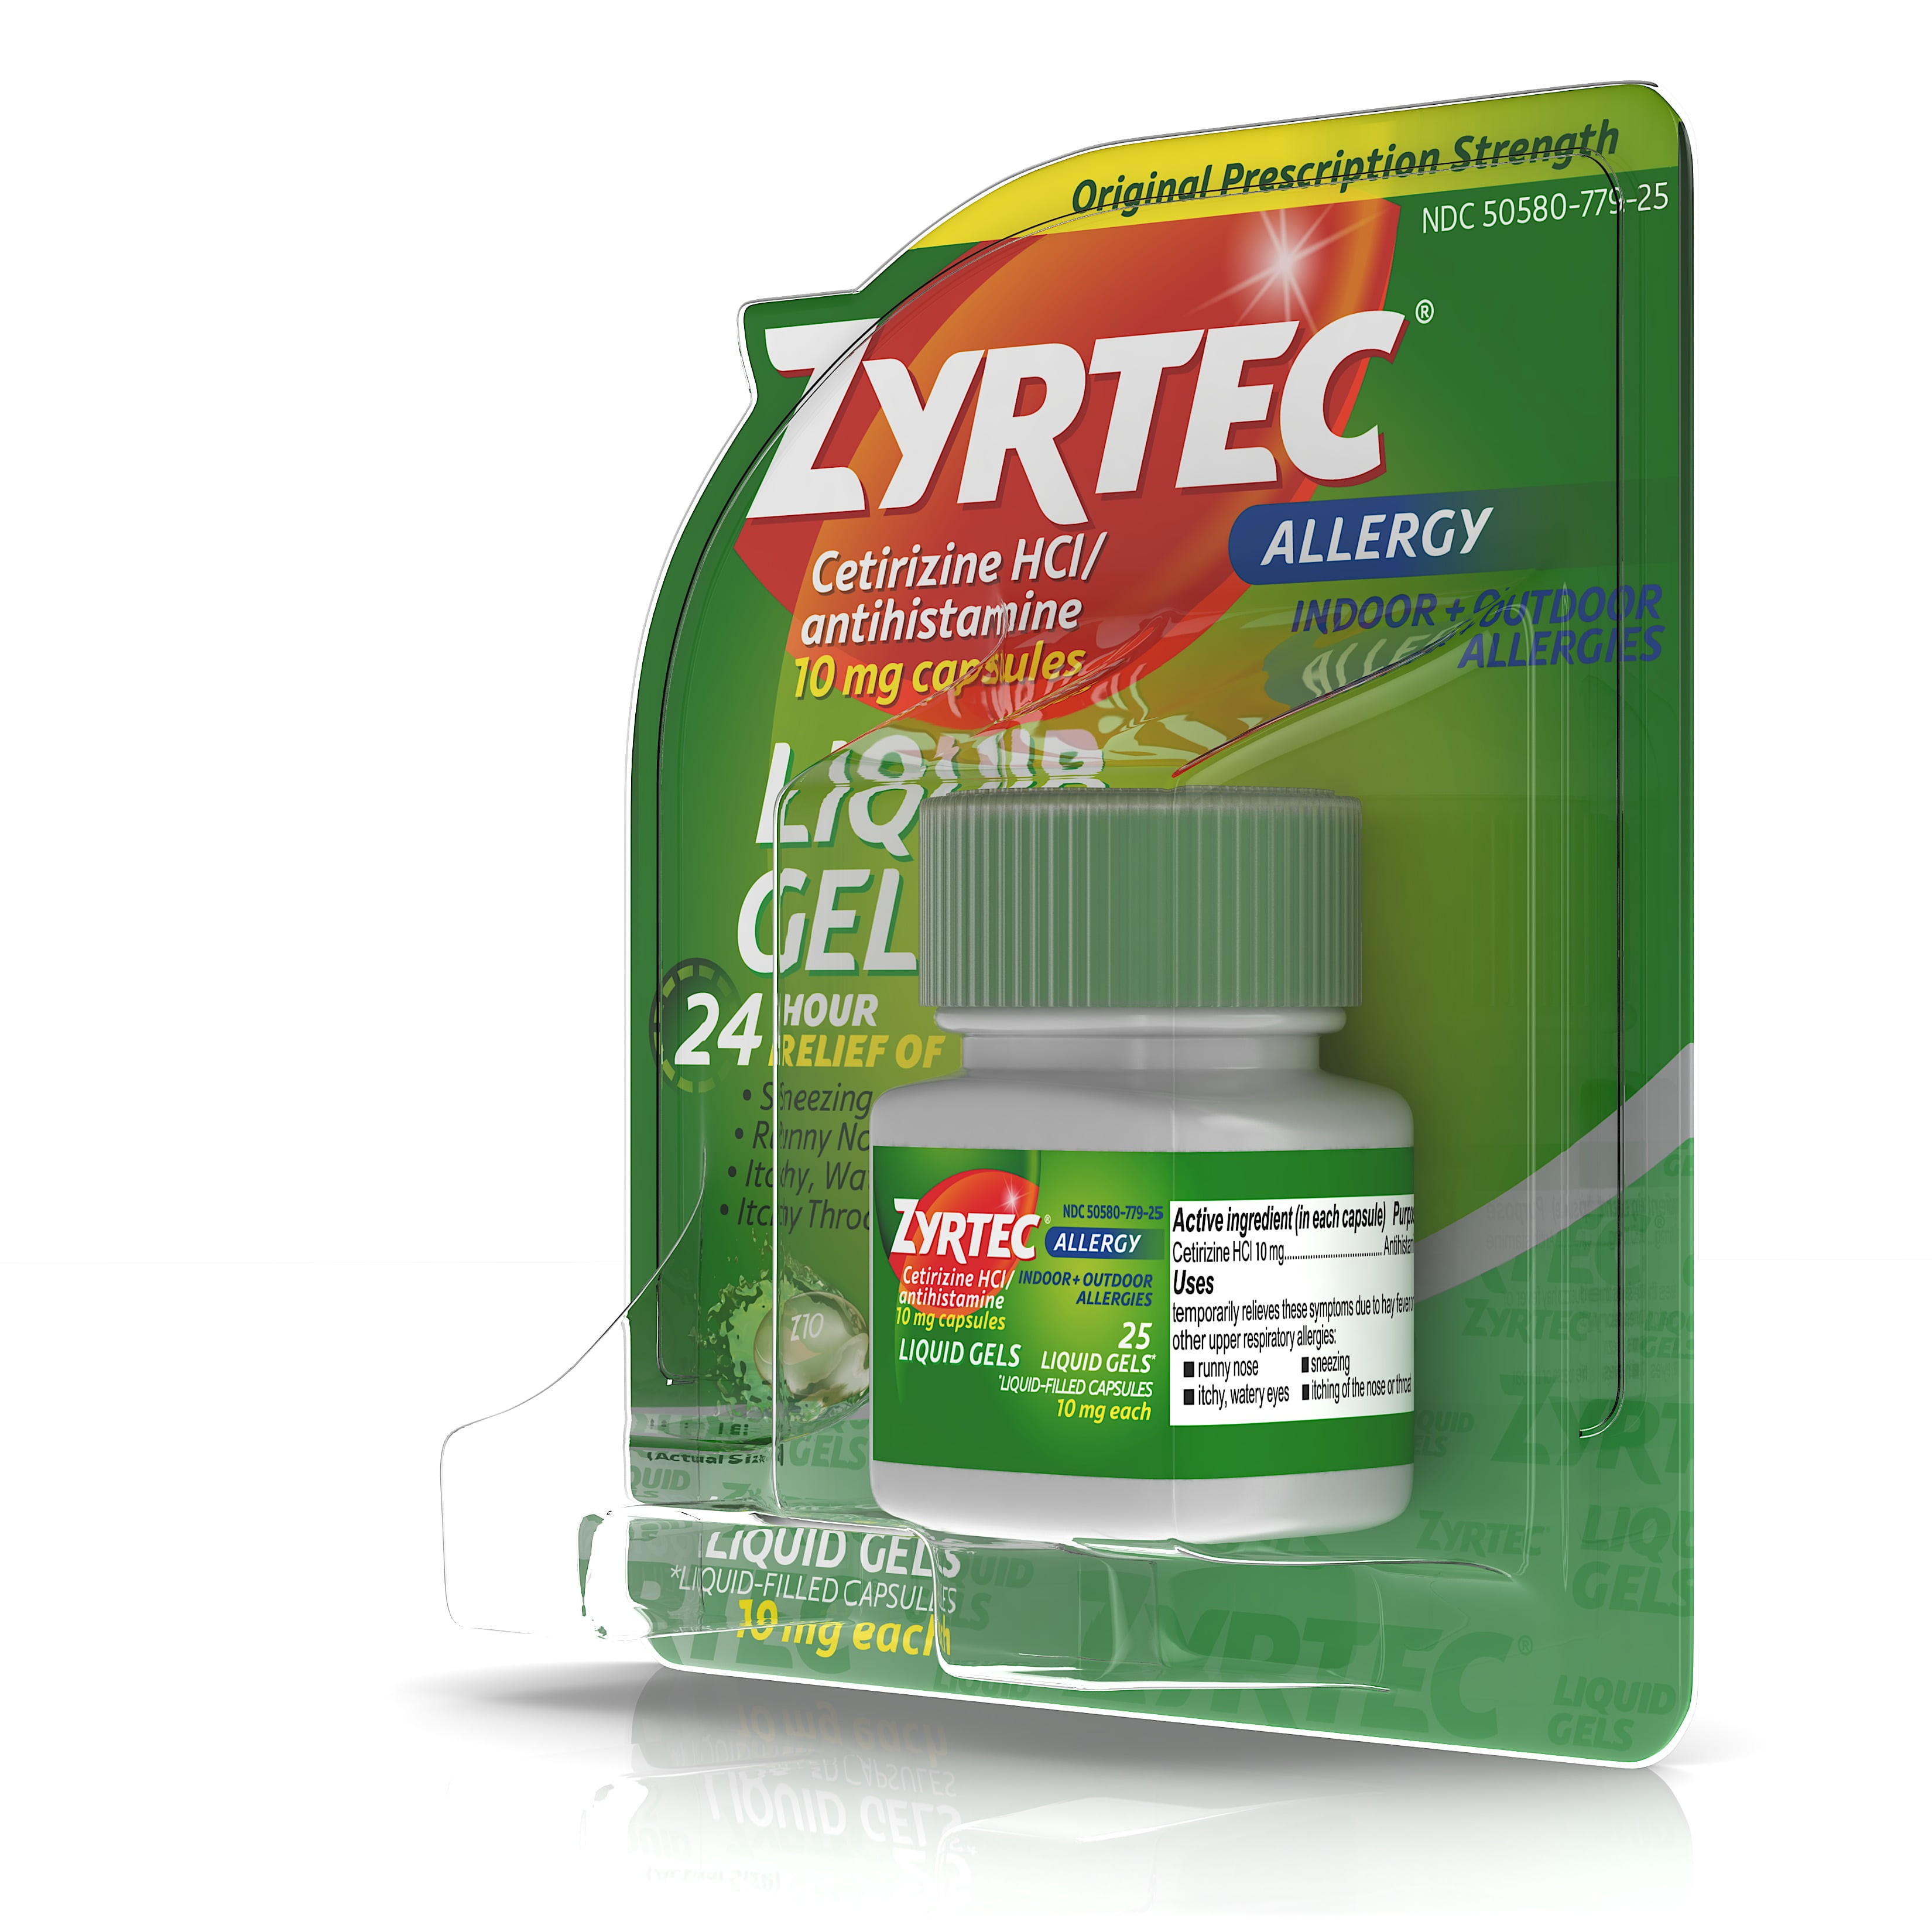 is it safe to take ibuprofen and zyrtec together